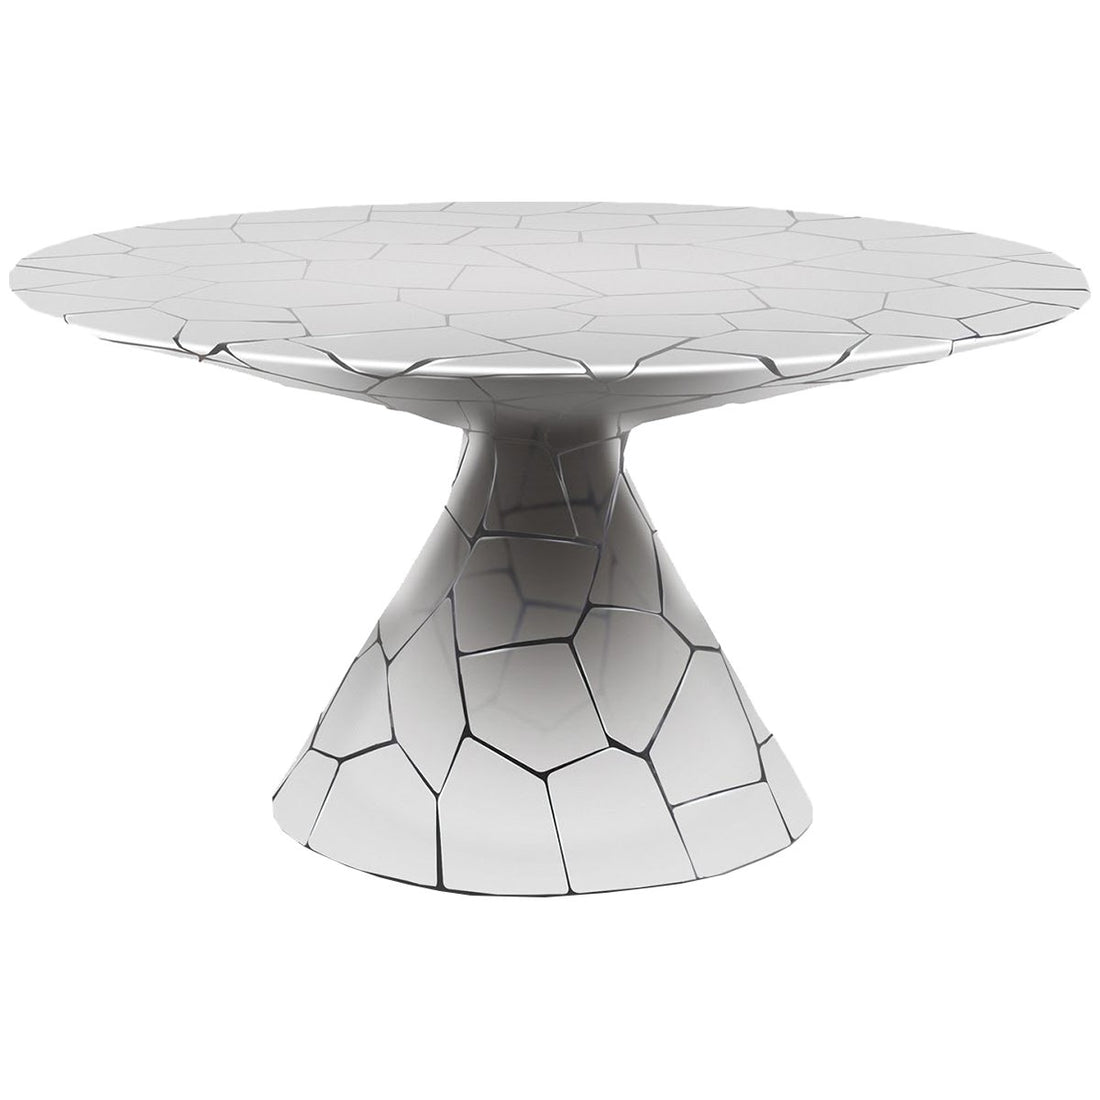 Phillips Collection Crazy Cut Dining Table